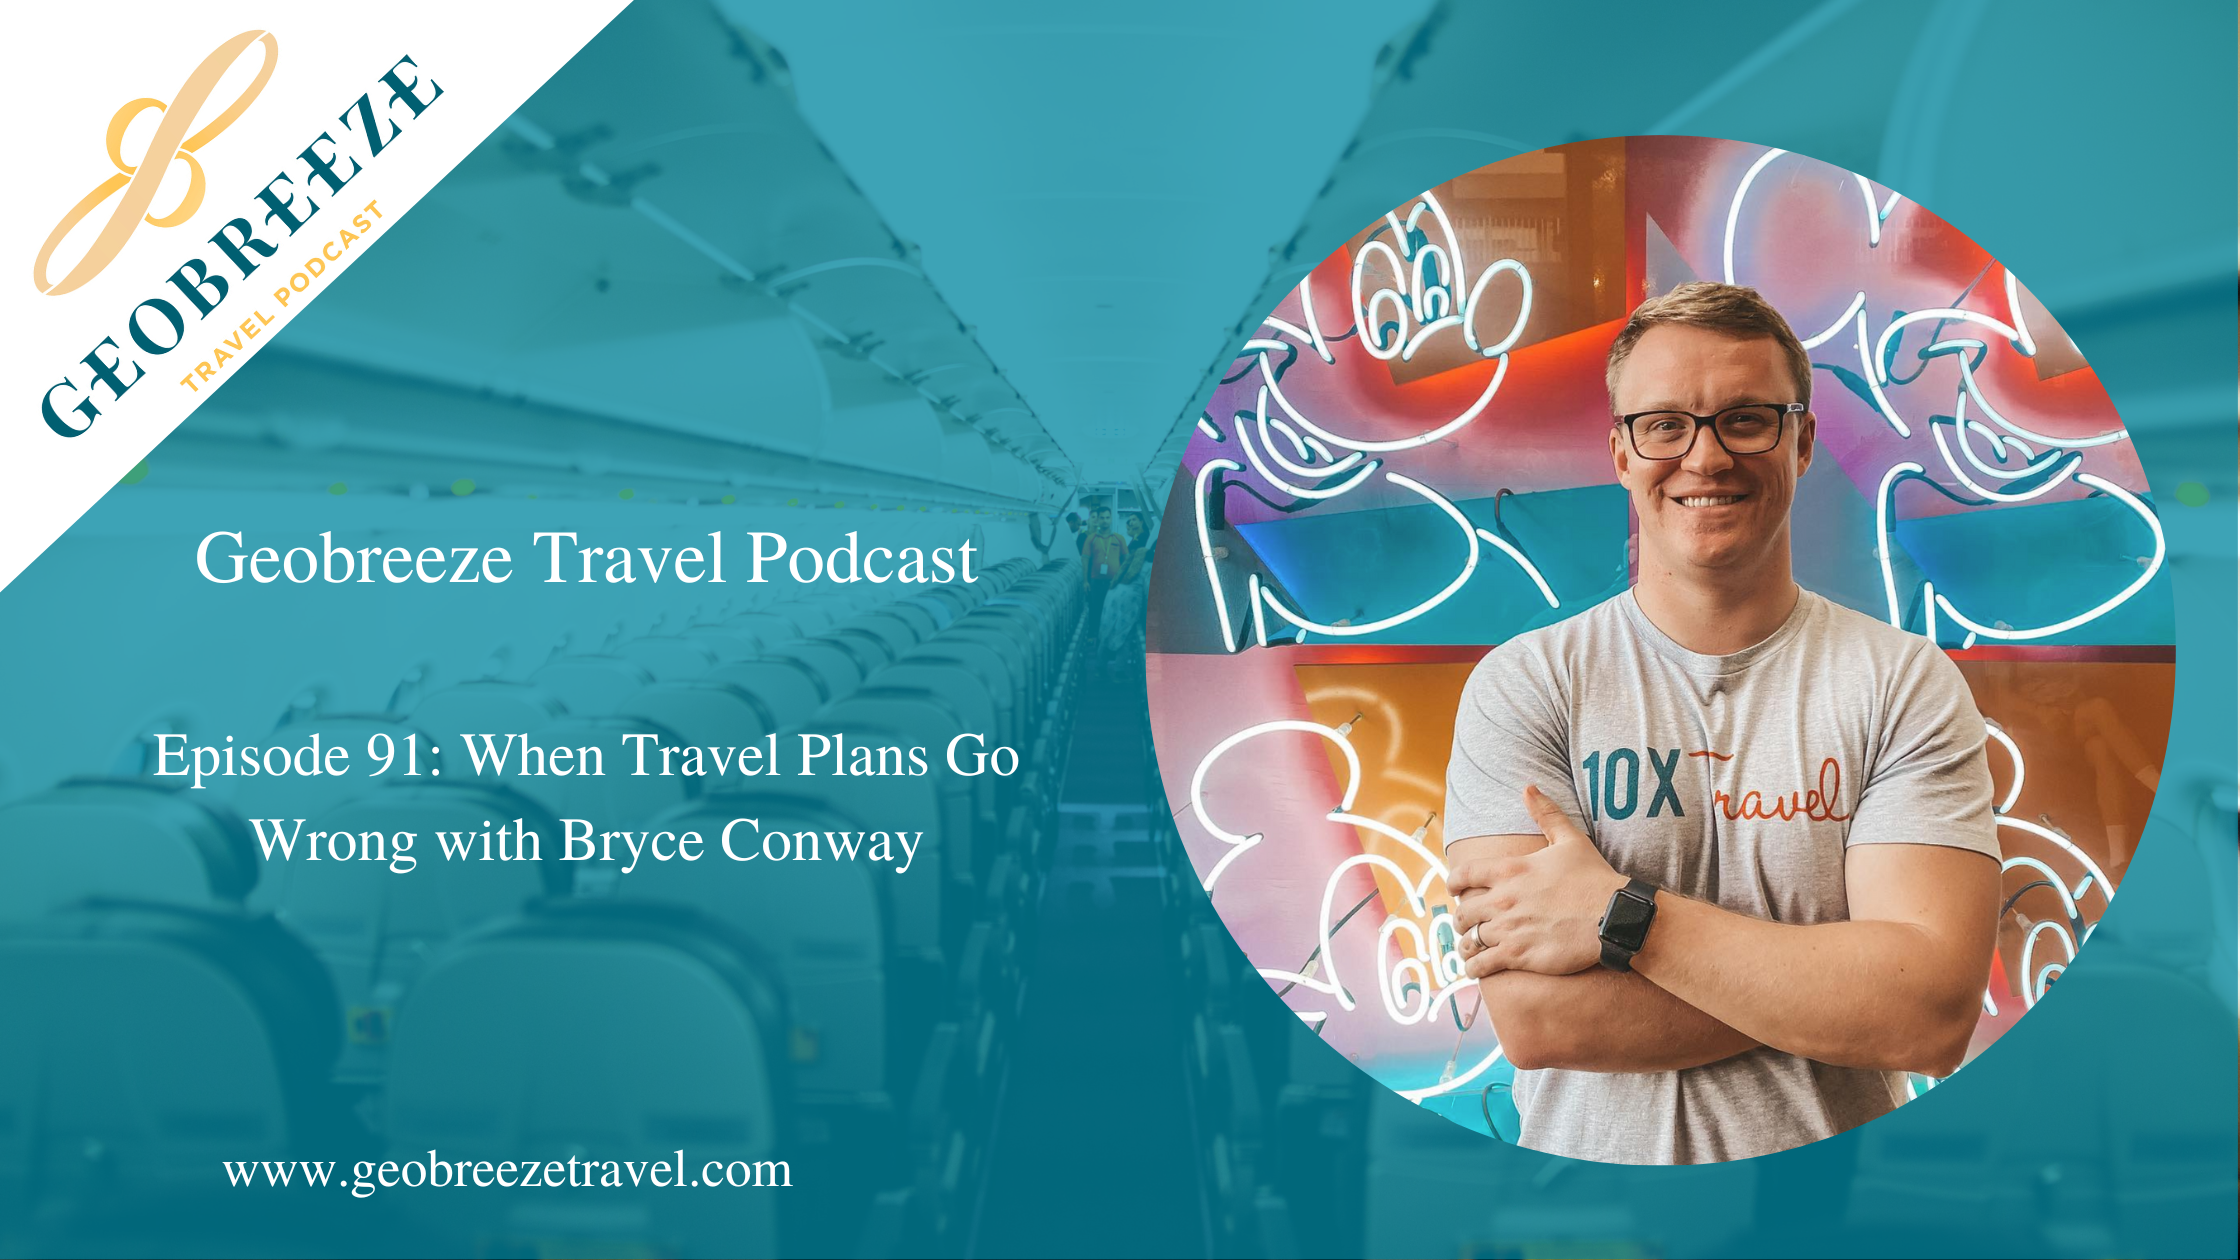 Episode 91: When Travel Plans Go Wrong with Bryce Conway